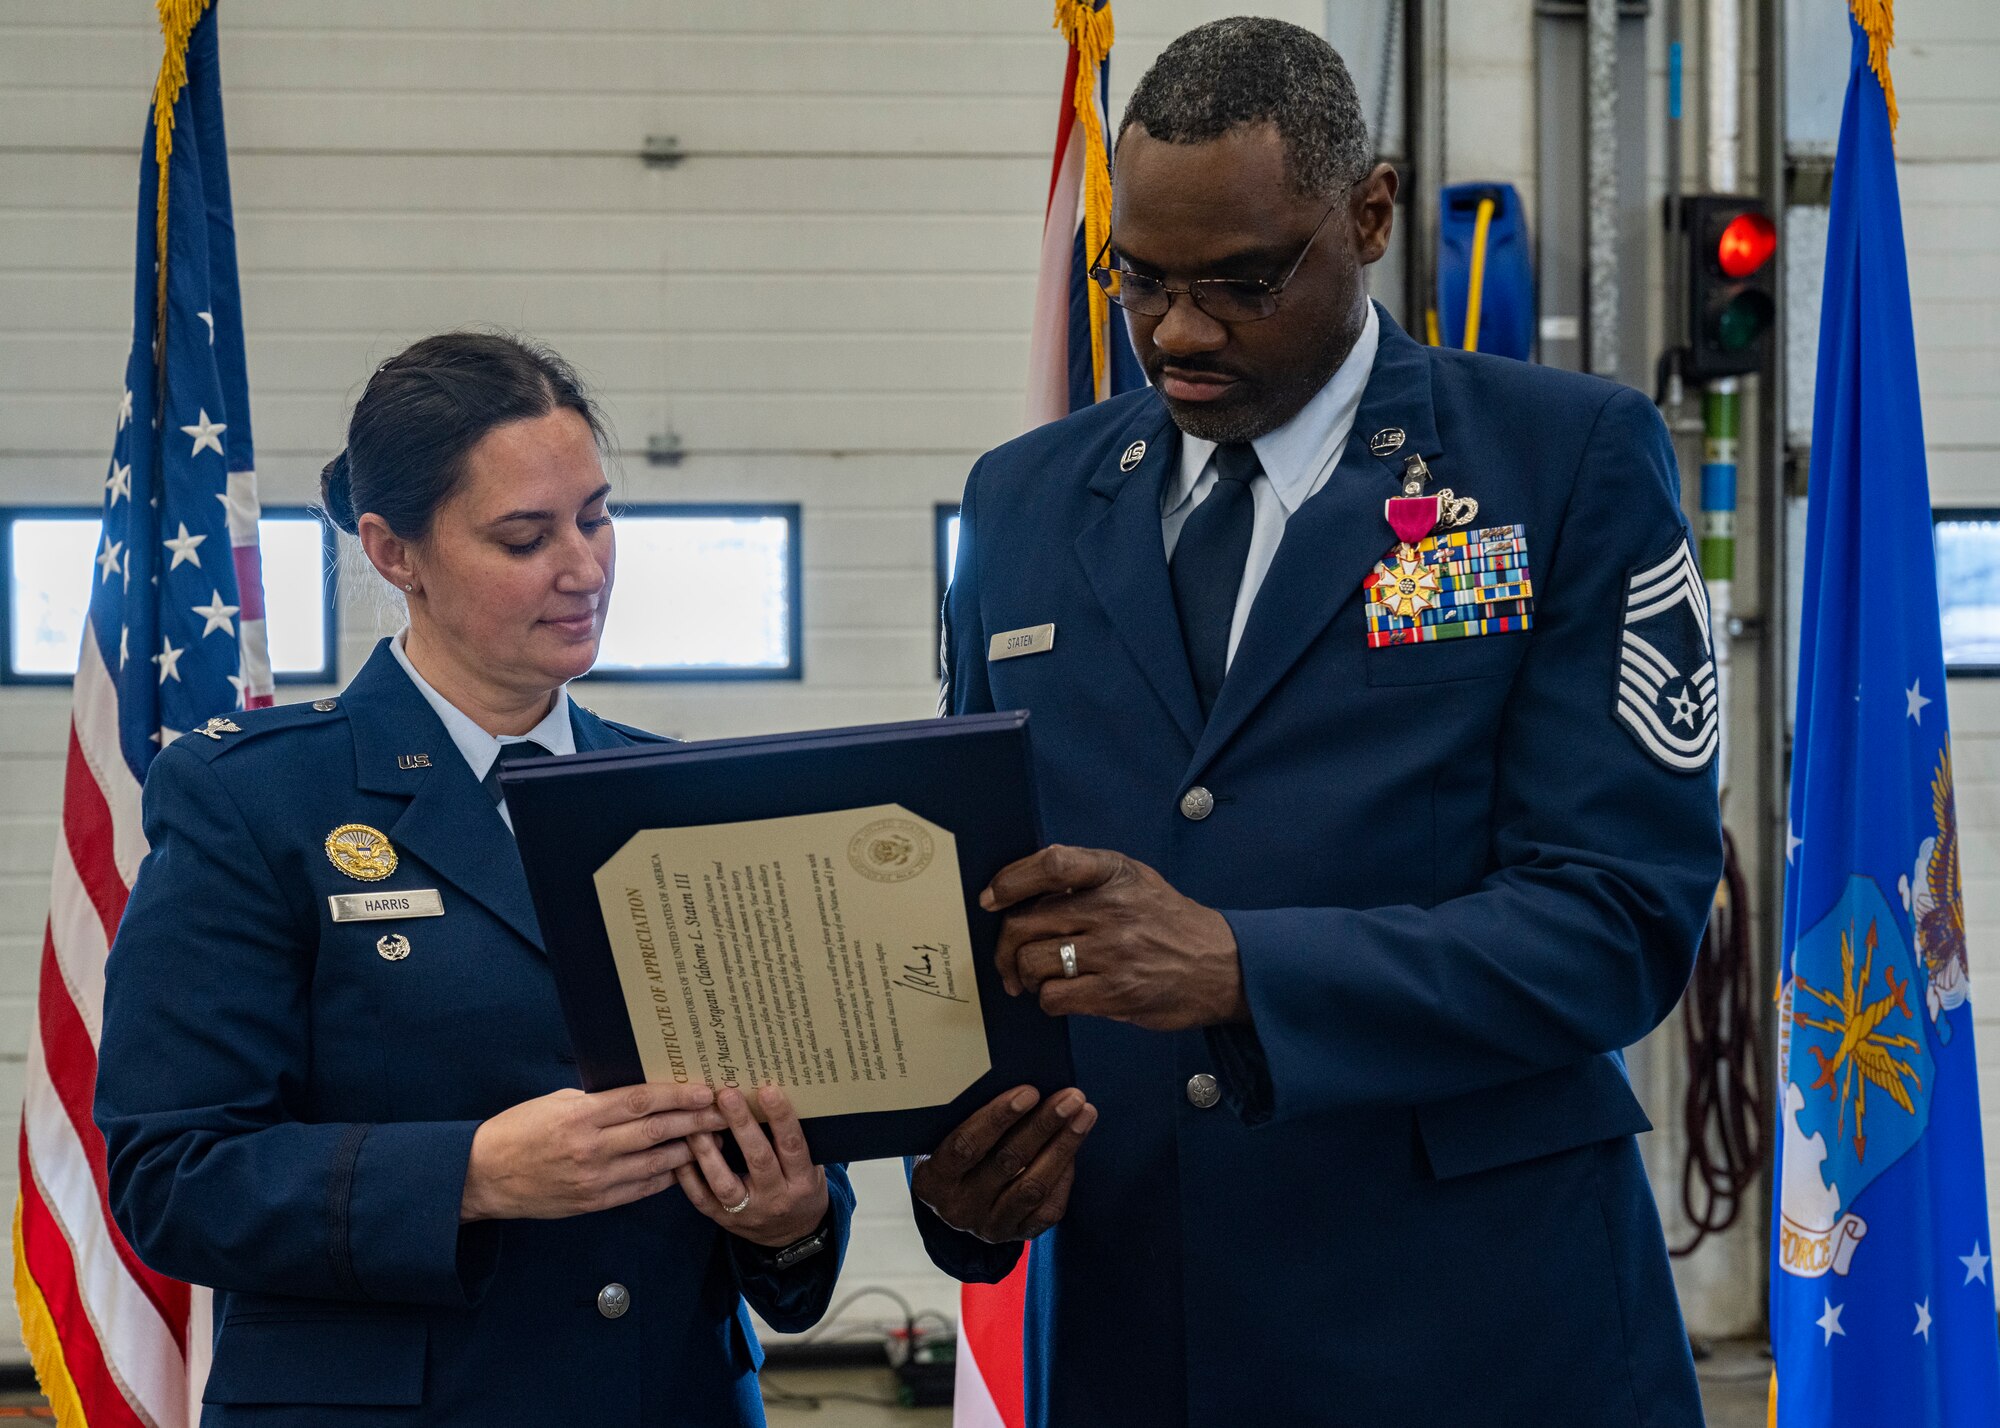 Staten was awarded with numerous awards and certificates for his 30 years of dedicated service to the U.S. Air Force.